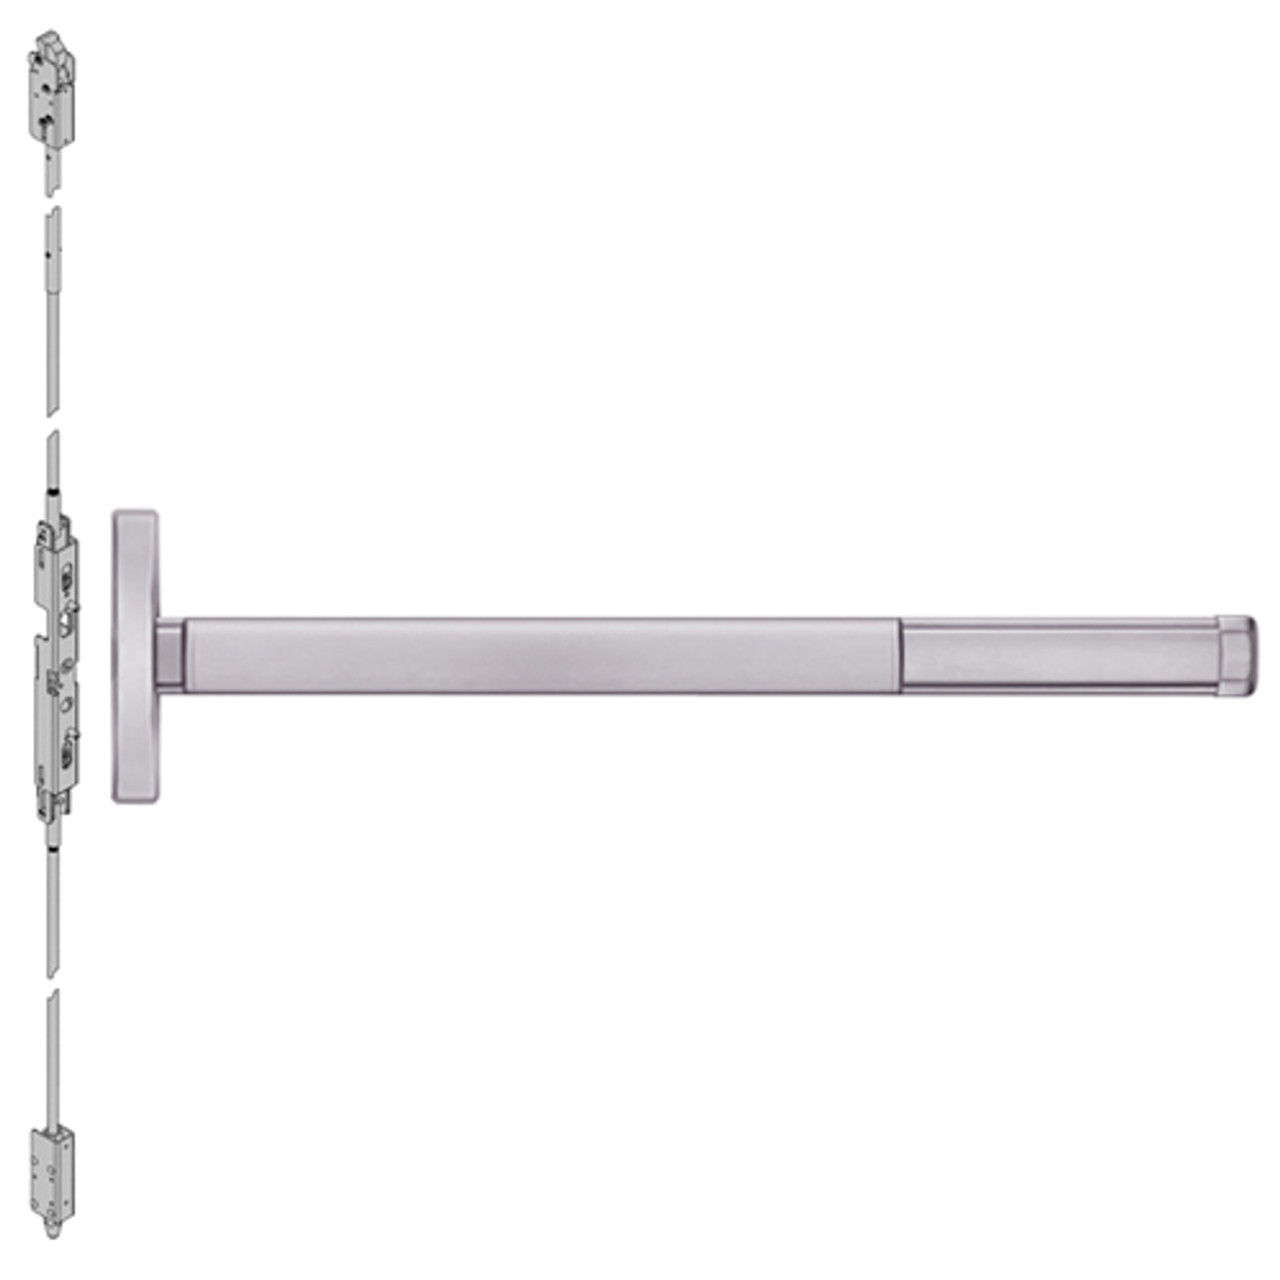 FL2614-630-36 PHI 2600 Series Fire Rated Concealed Vertical Rod Exit Device Prepped for Lever Always Active in Satin Stainless Steel Finish